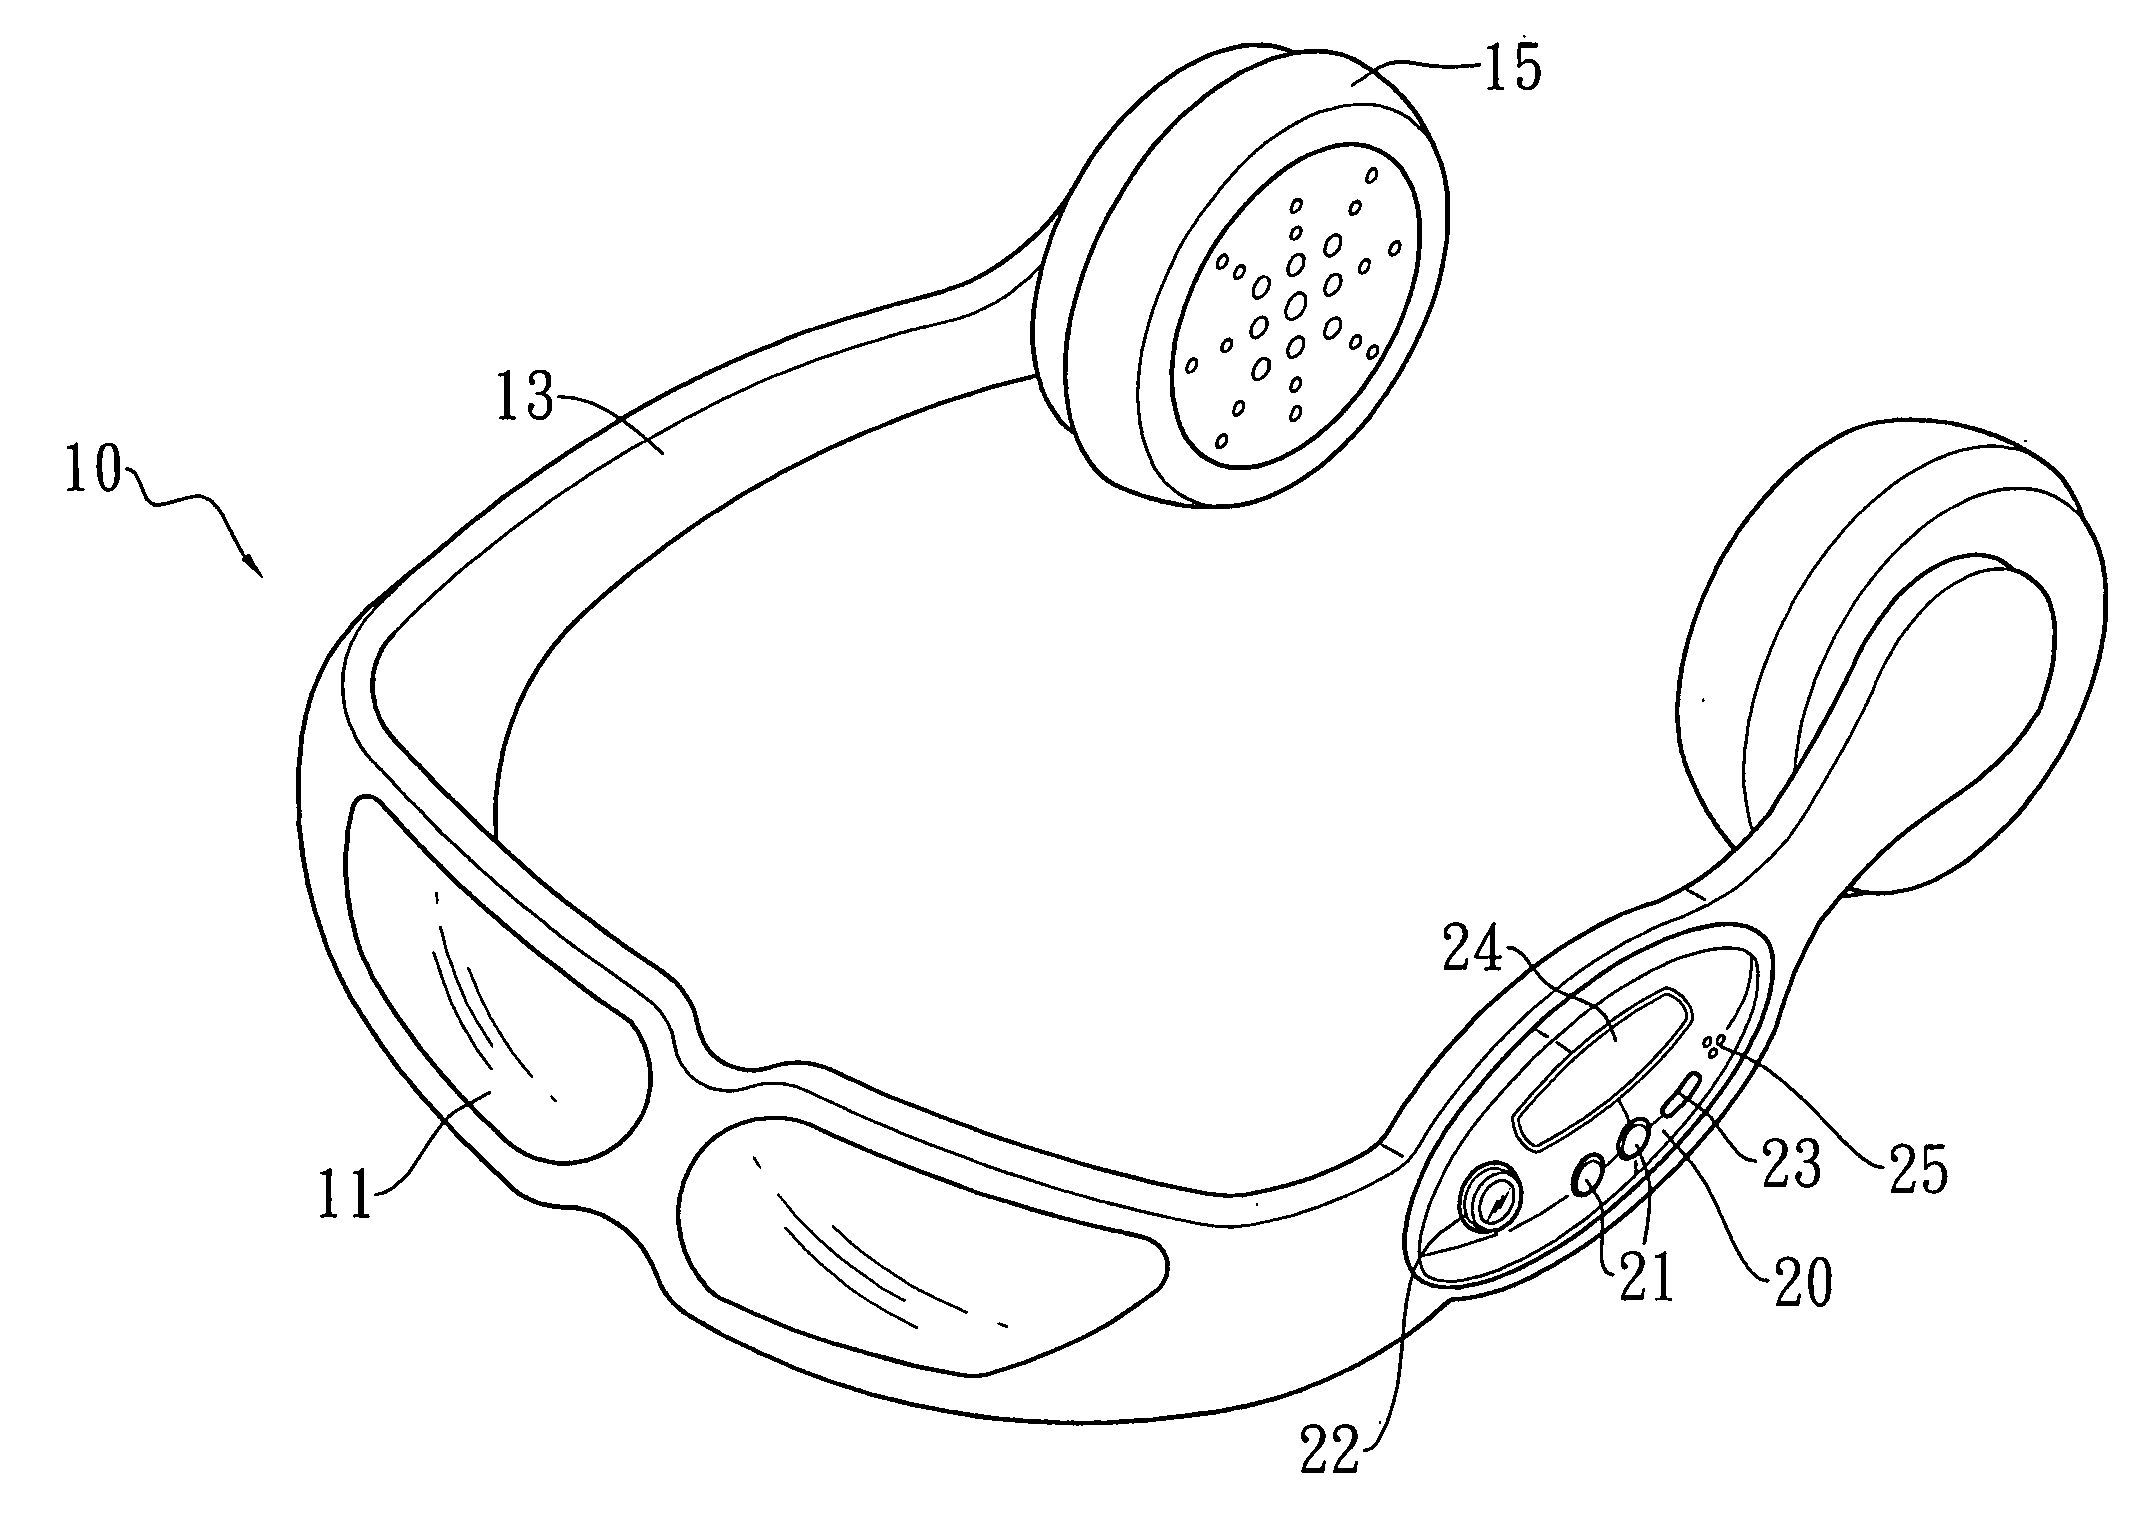 Structure of a pair of glasses